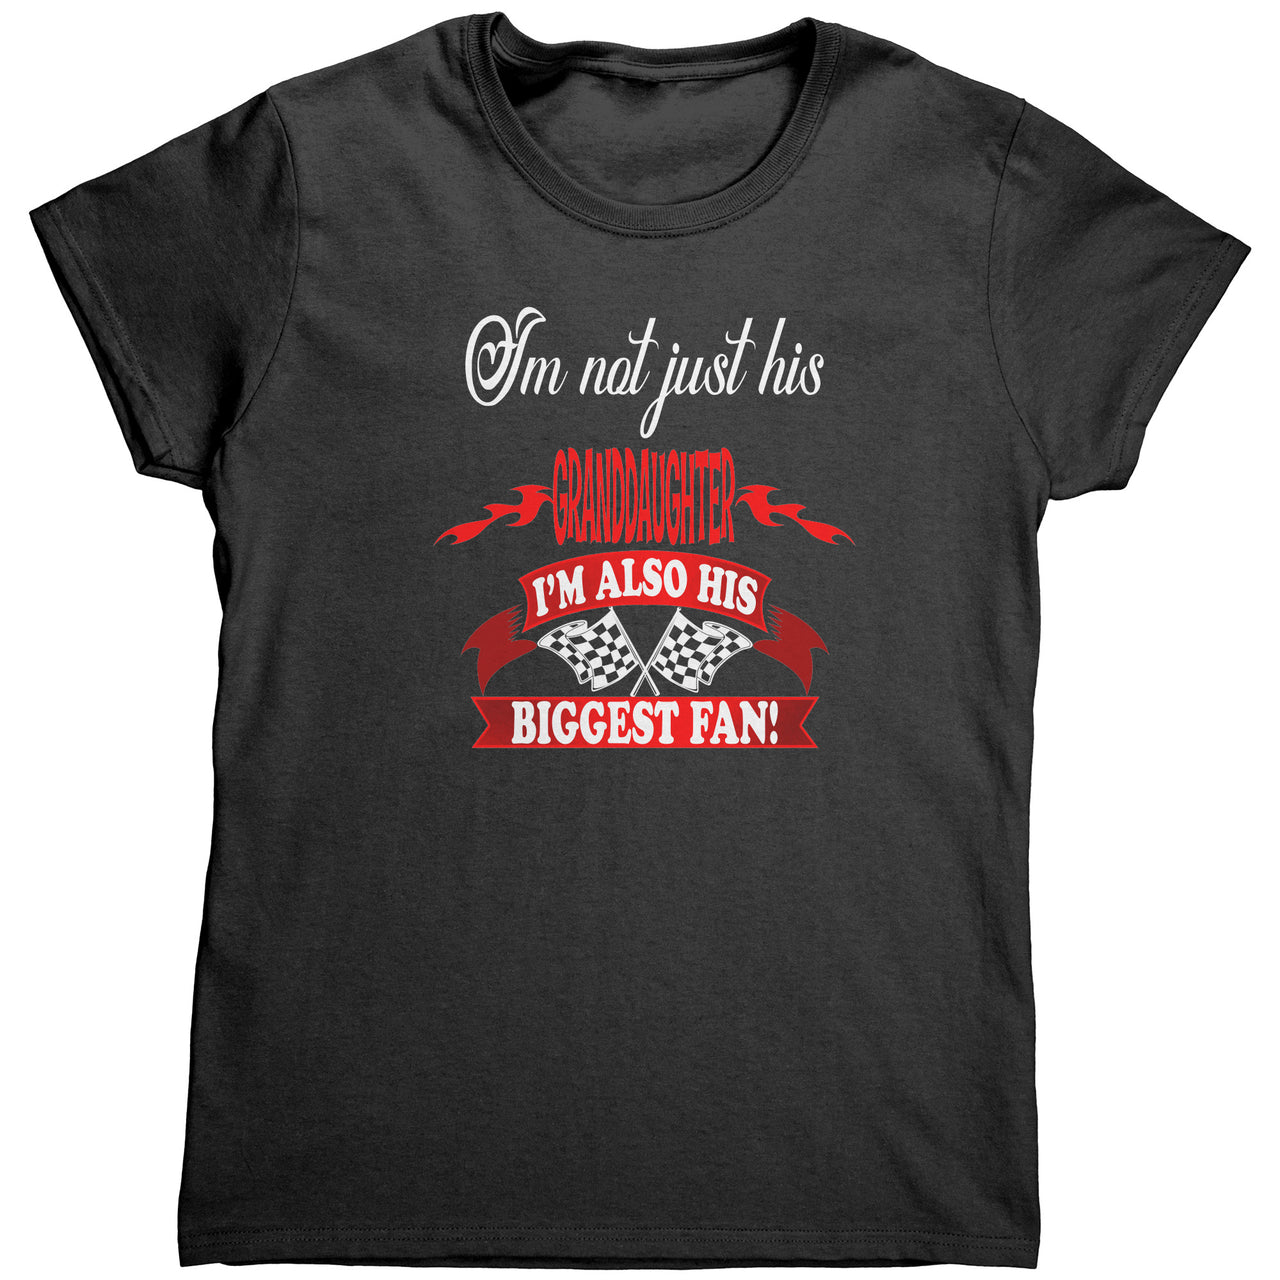 I'm Not just His Granddaughter T-Shirts